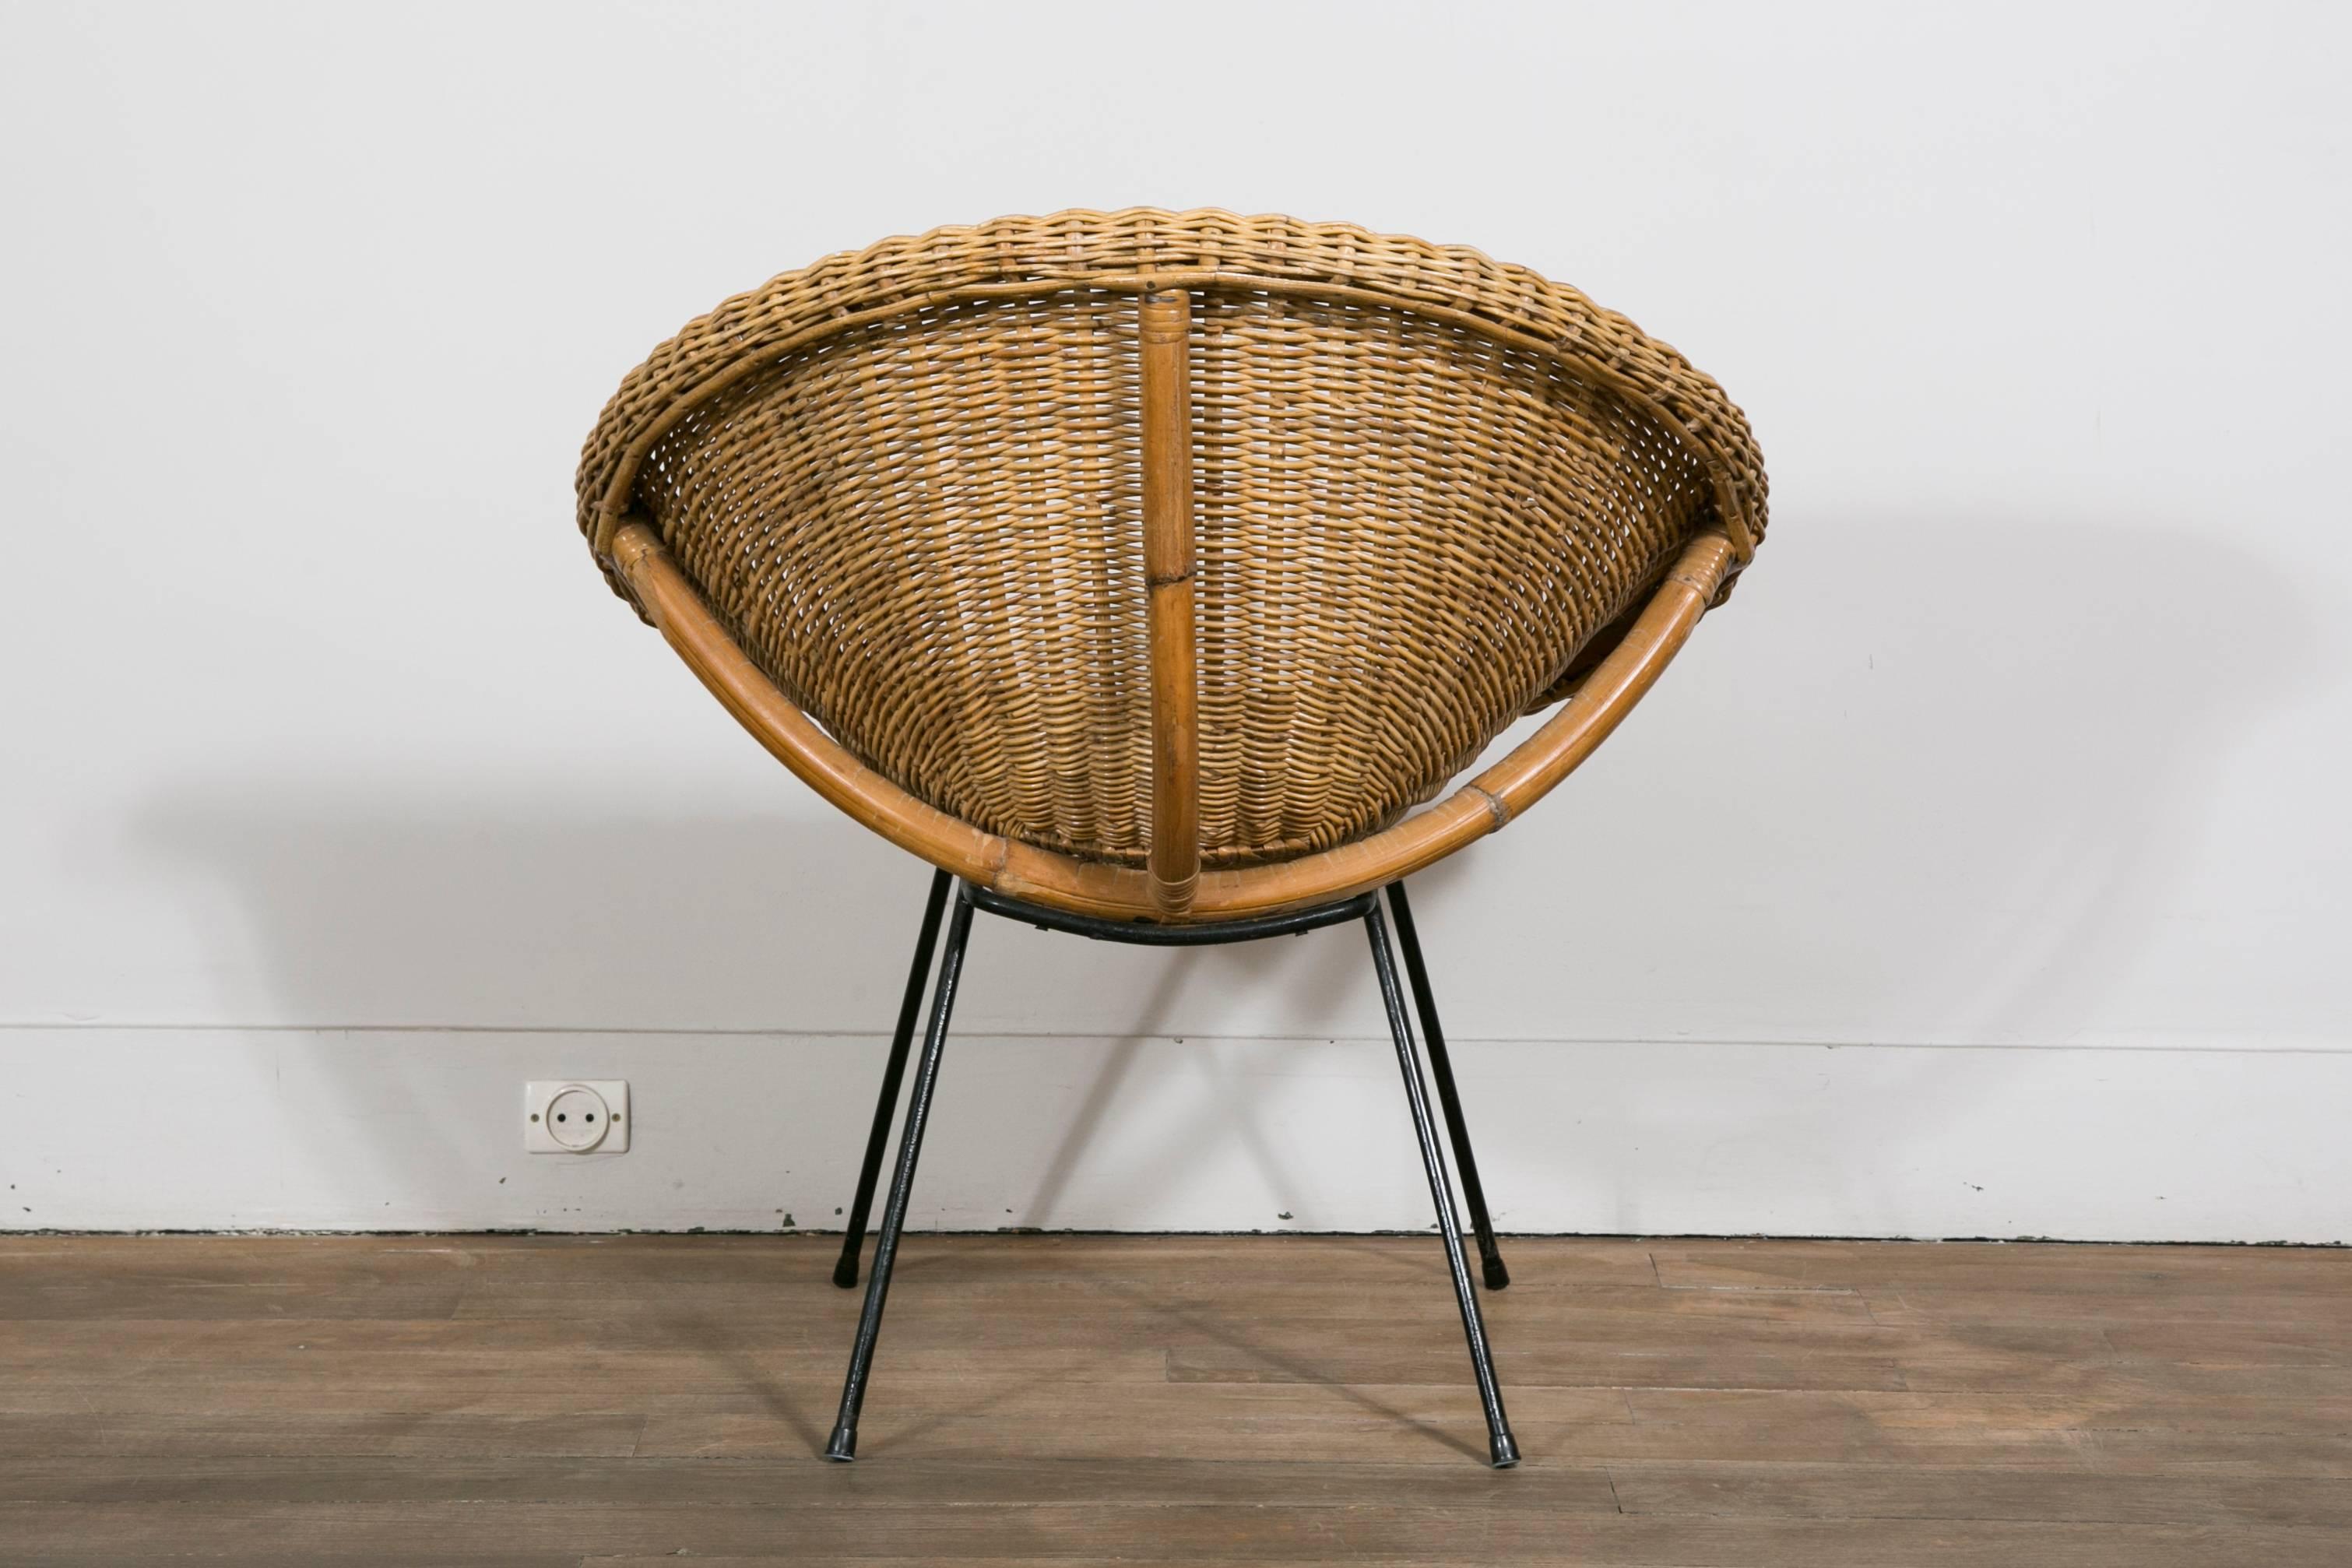 Bamboo Rattan Set of Scoop Chairs and Table, Style of Janine Abraham, France